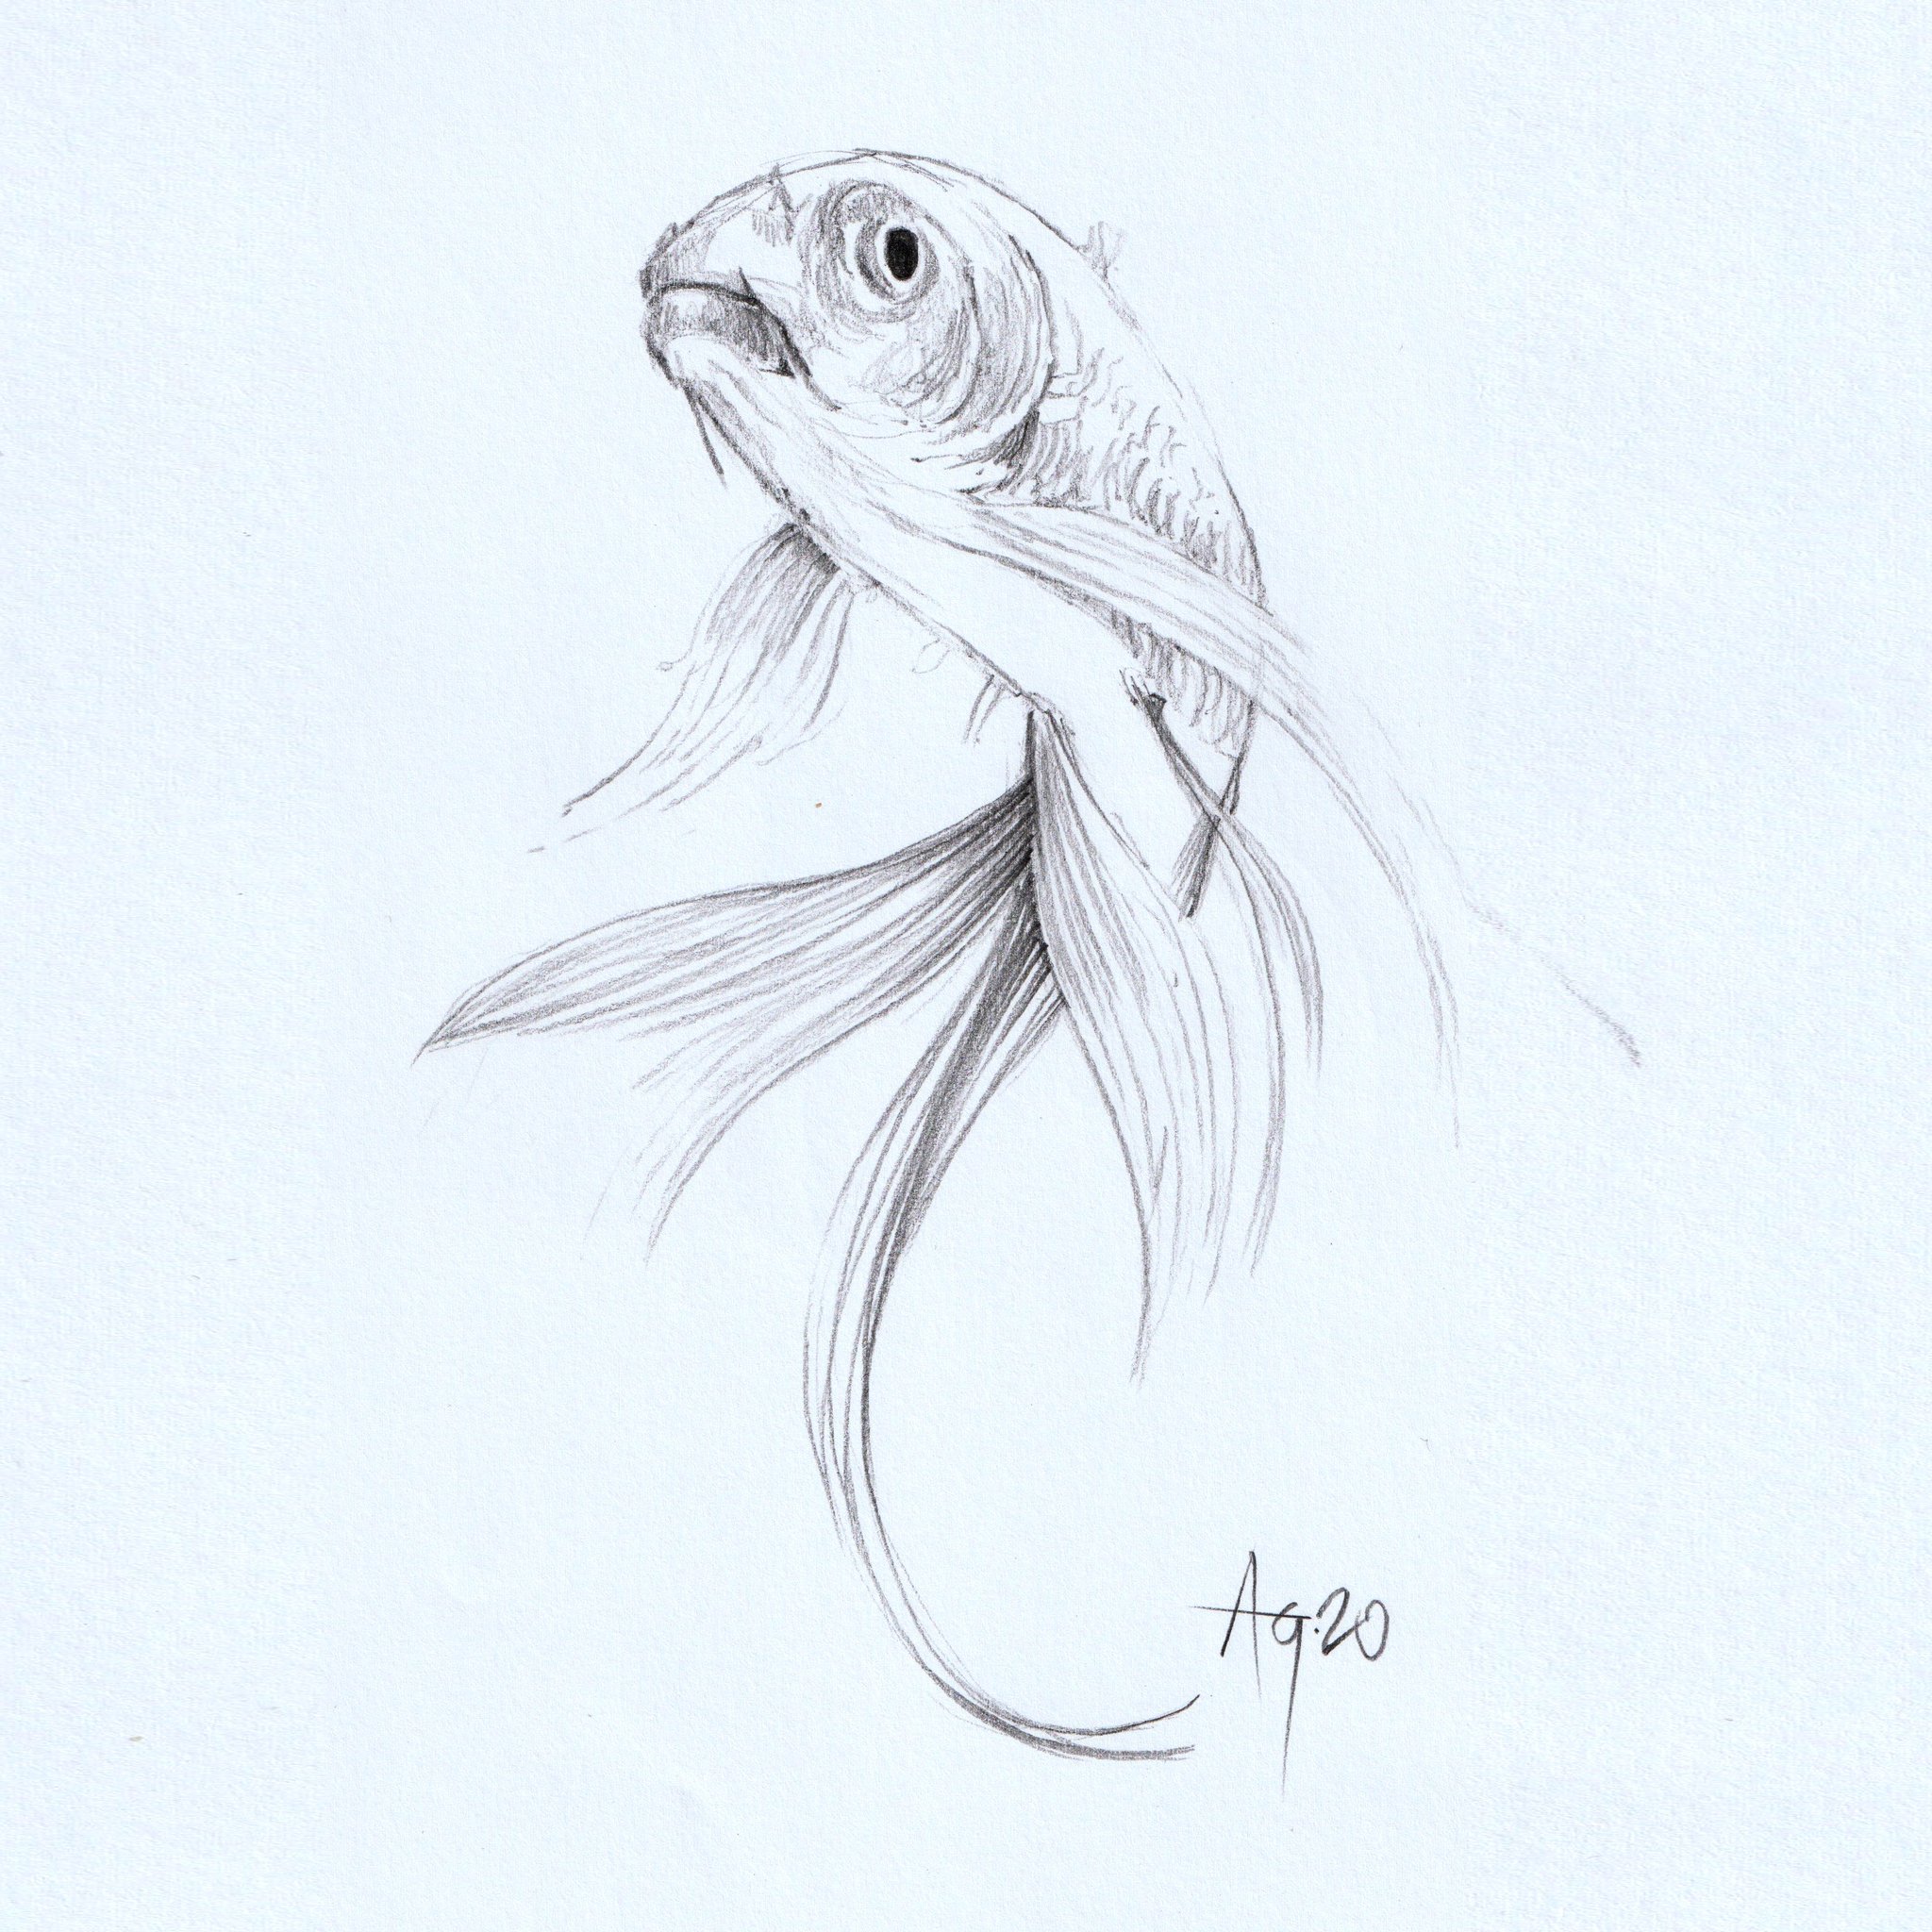 Anthony Greentree on X: #animalmarch Quick pencil sketch of a Goldfish. # thedailysketch #TuesdayMotivation #art #artist #sketch   / X